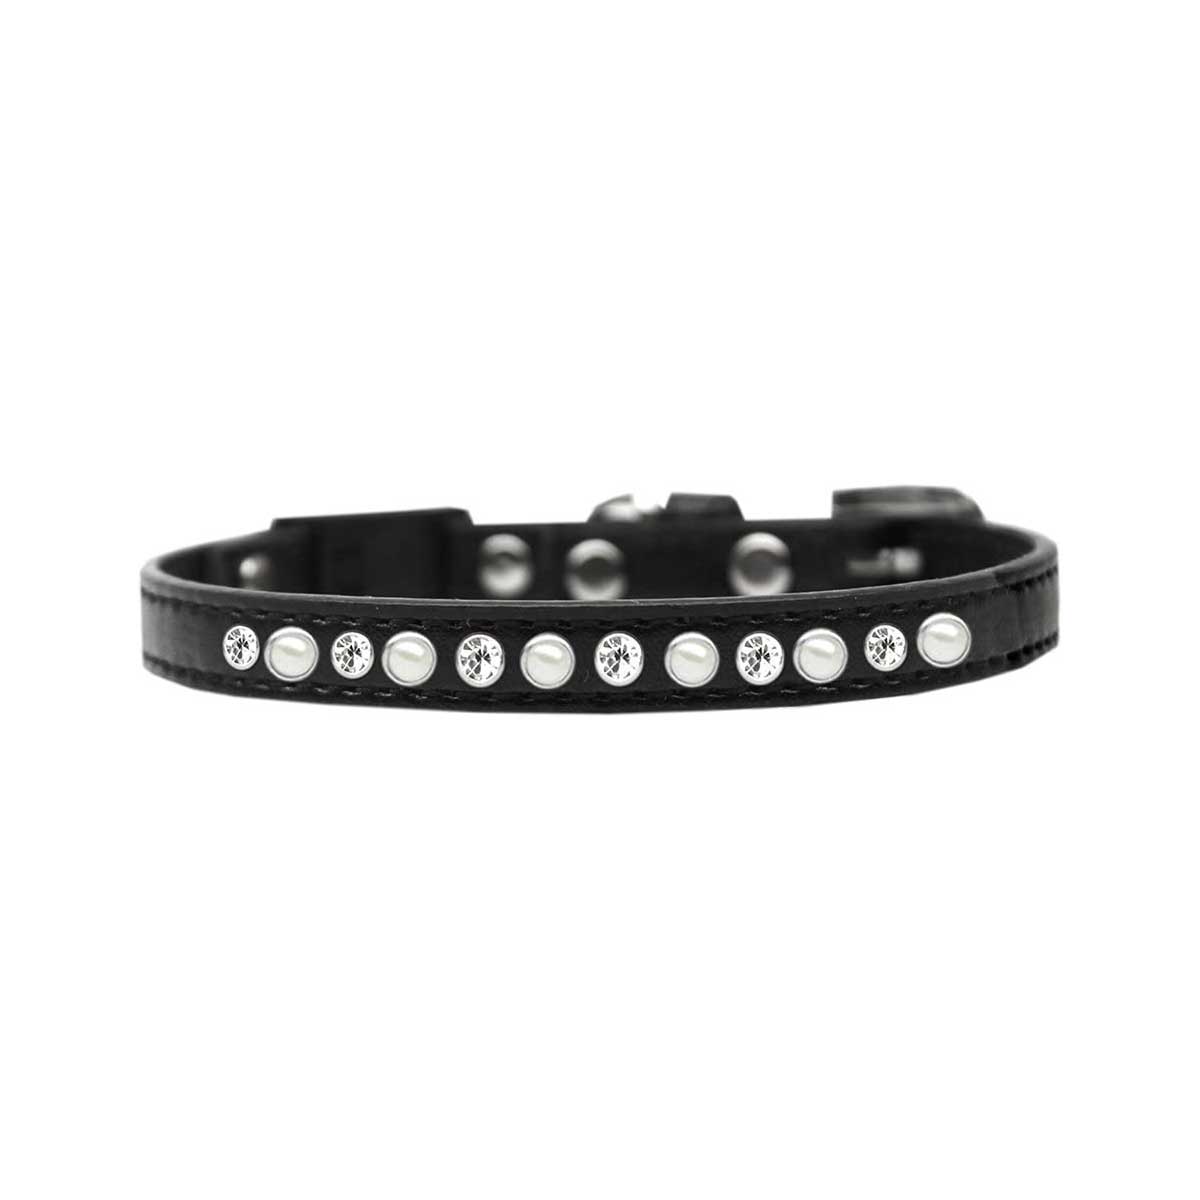 Pearl and Rhinestone Cat Safety Collar in Black | Pawlicious & Company